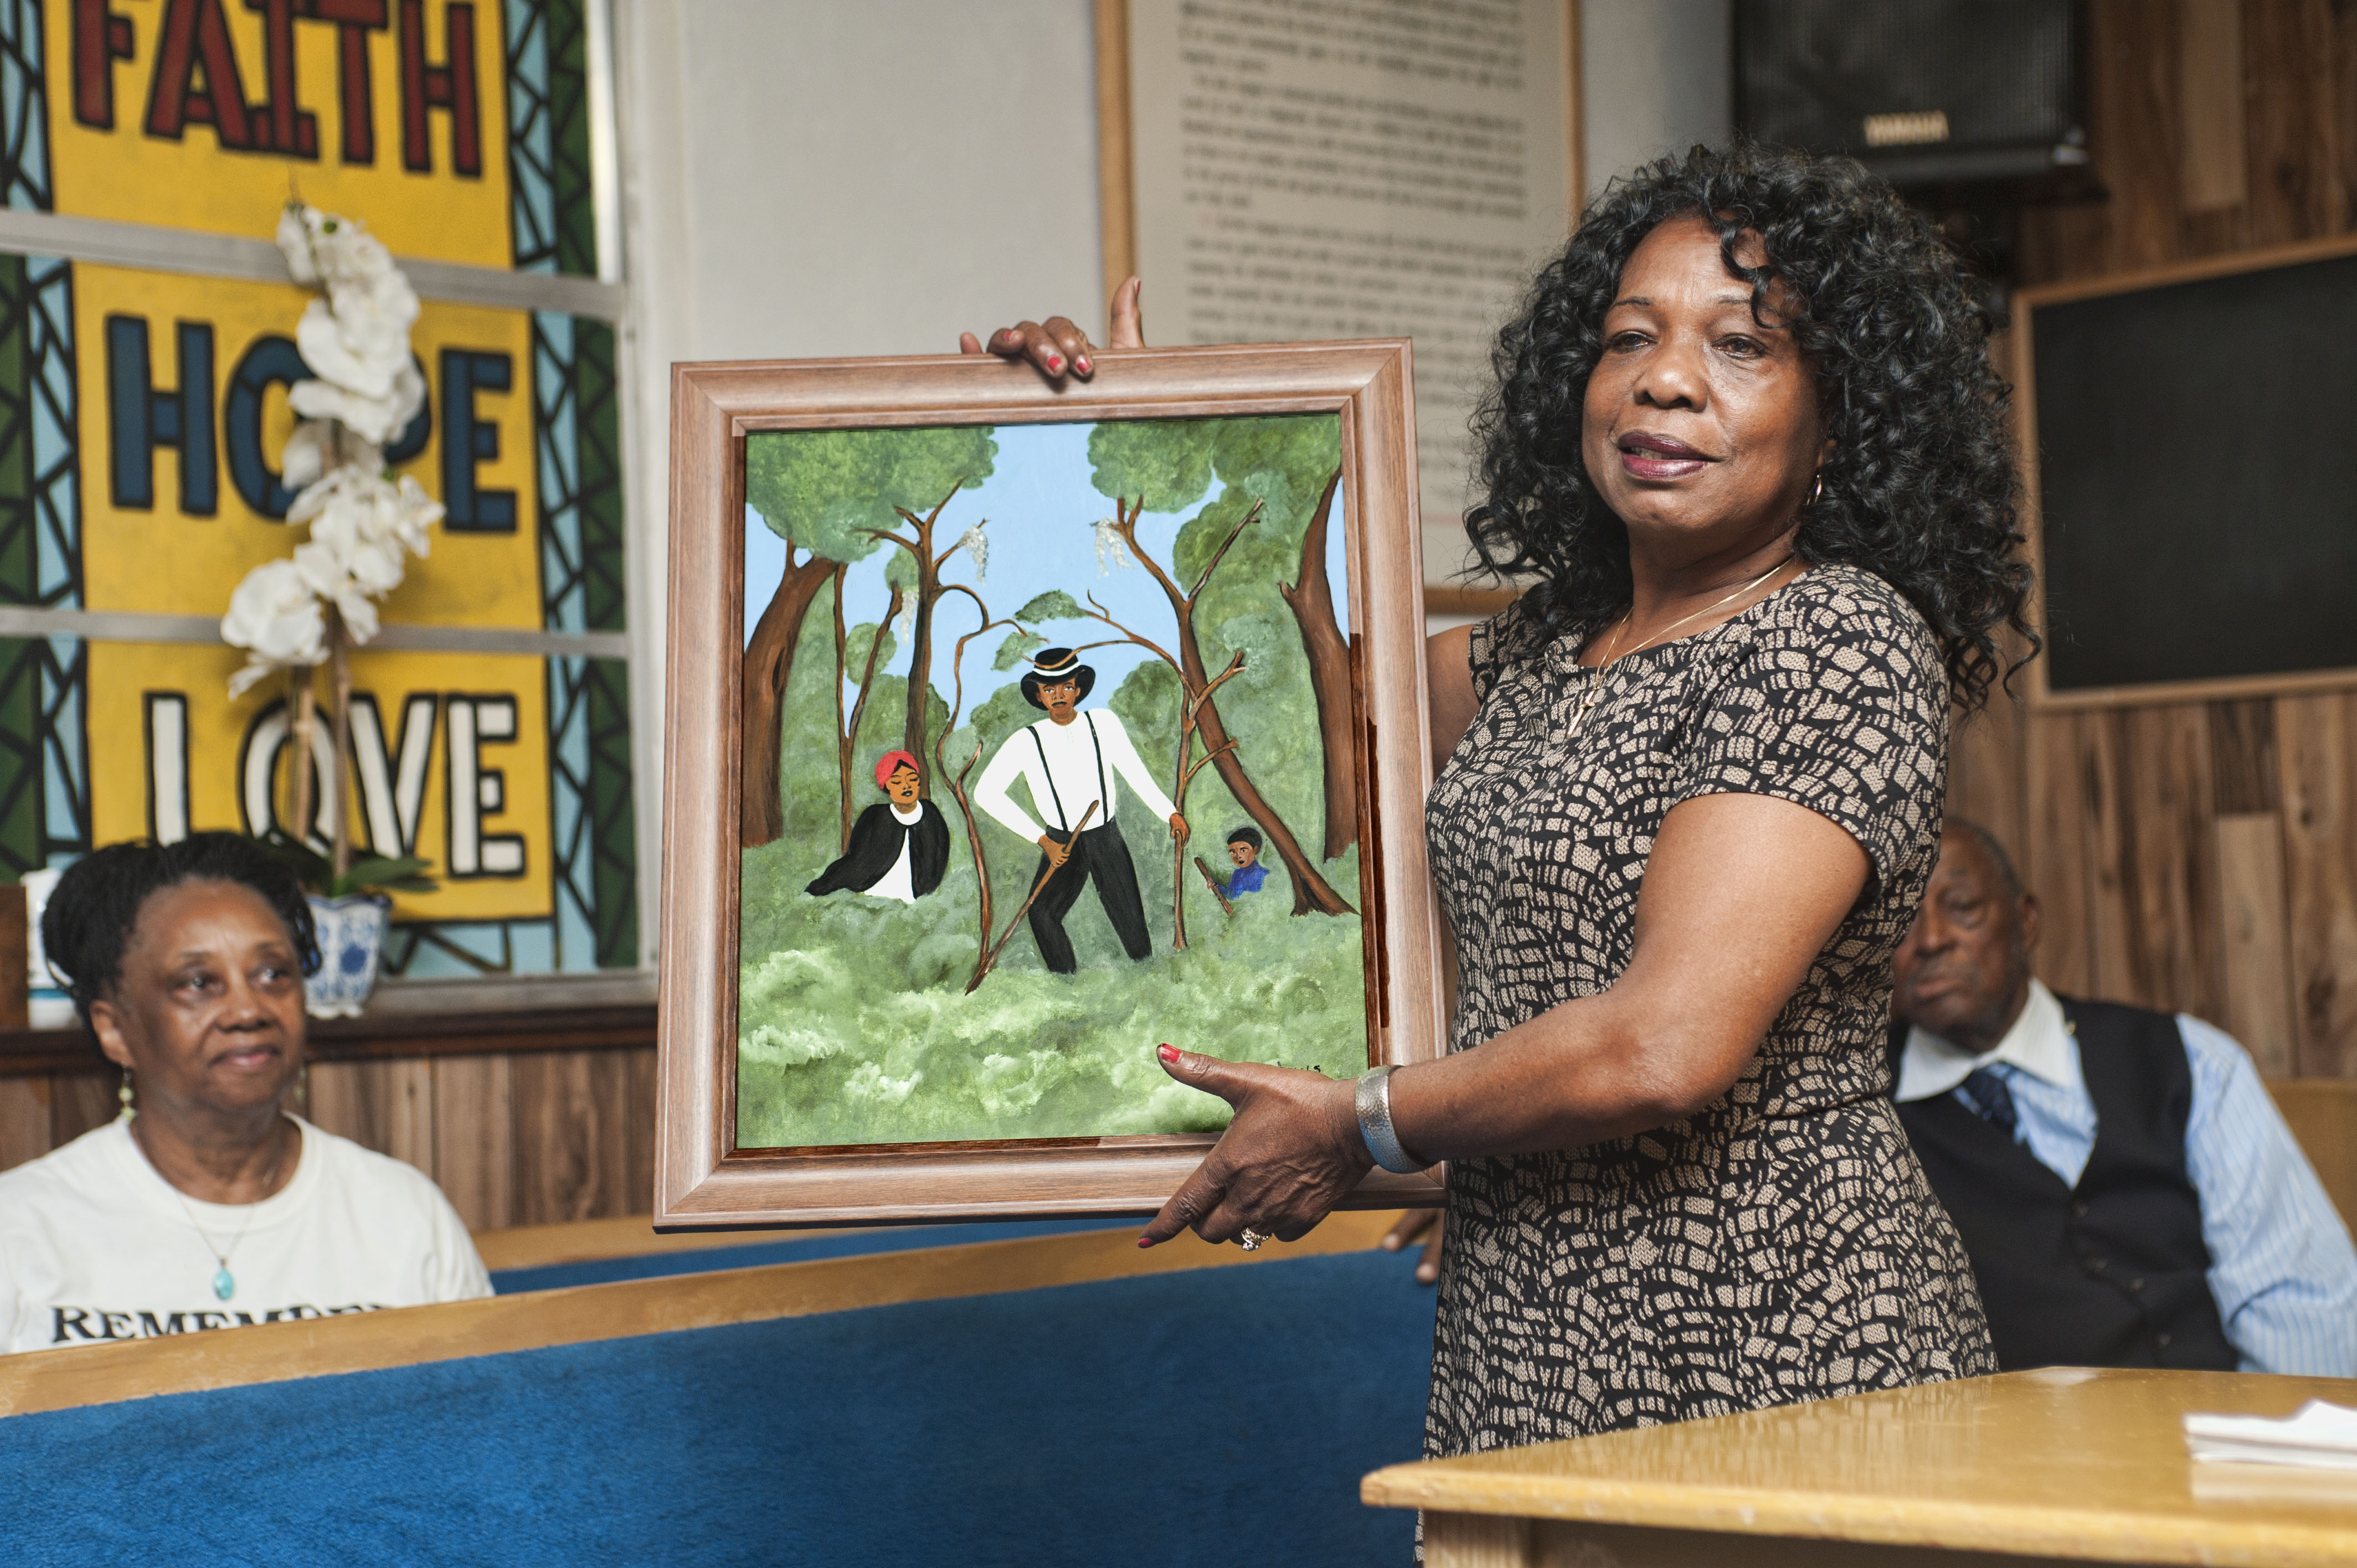 The summer program includes a trip to Rosewood, Fla., where students learn about the 1923 massacre of its black citizens. The photo shows an African American woman holding a painting of a small family hiding in the woods around Rosewood.